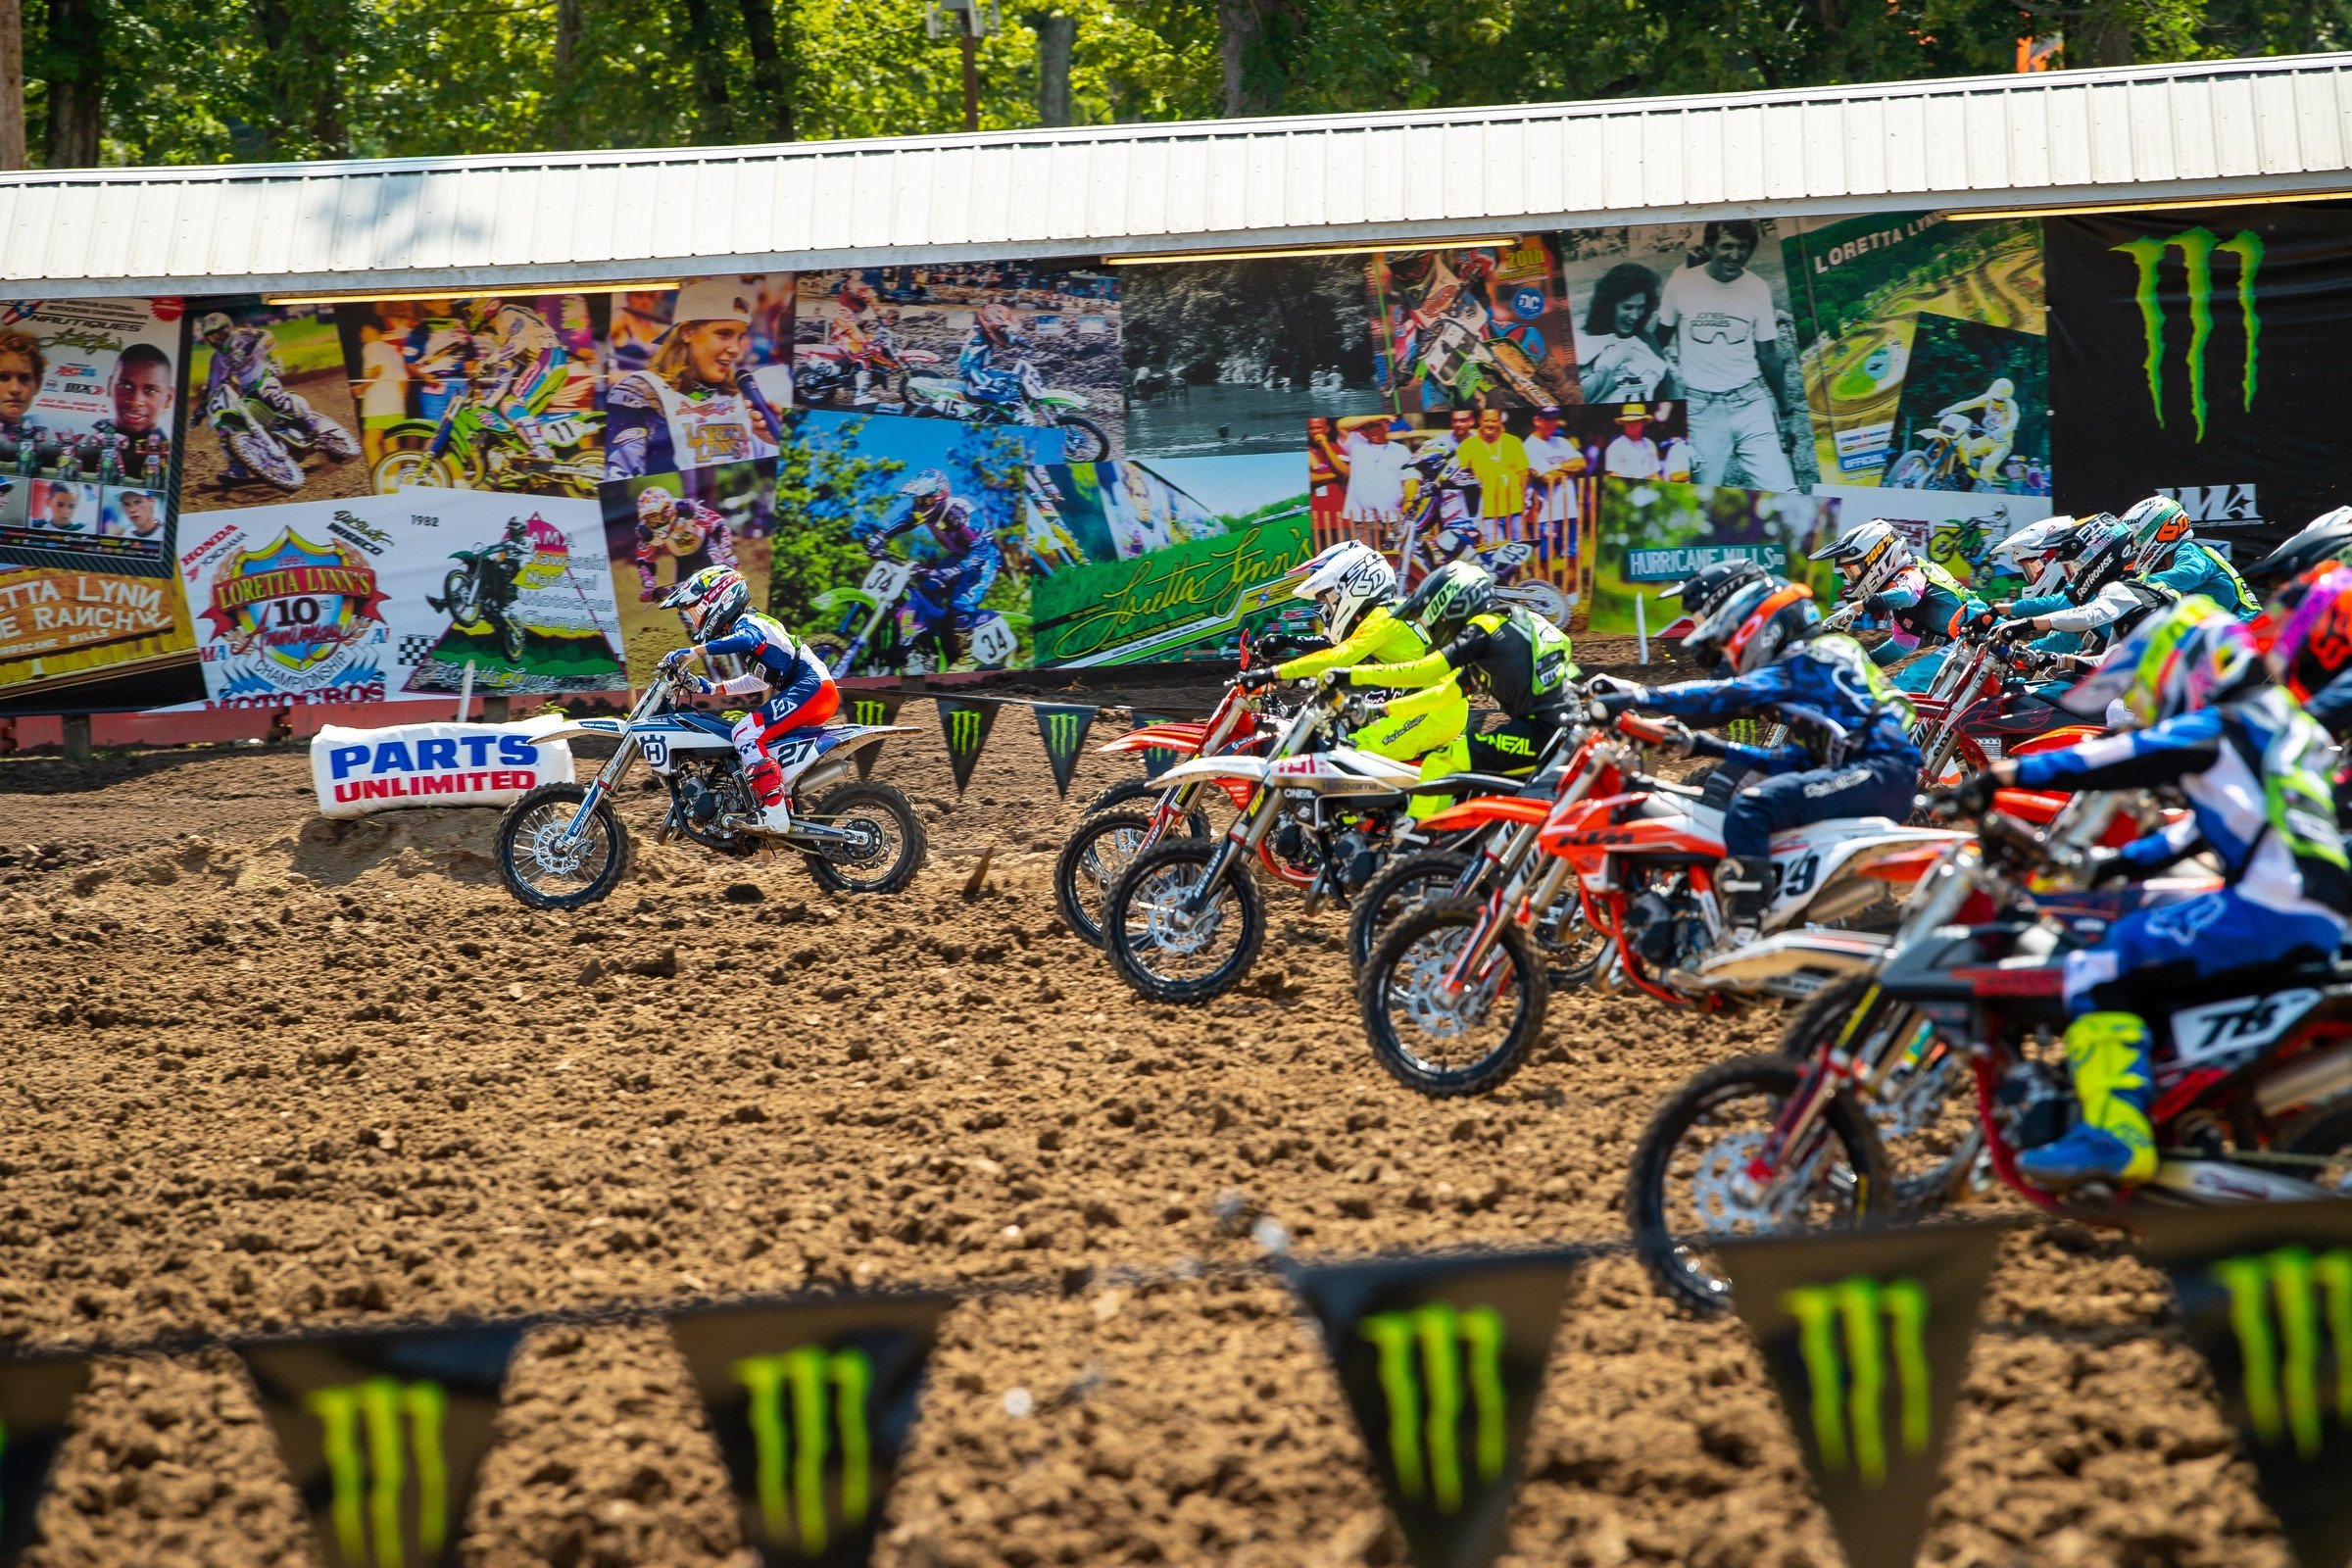 Spring Creek Motocross Park is where the fastest racers on earth come to race! Come check out our picturesque motocross facility that is located in Millville, MN and is also Round 7